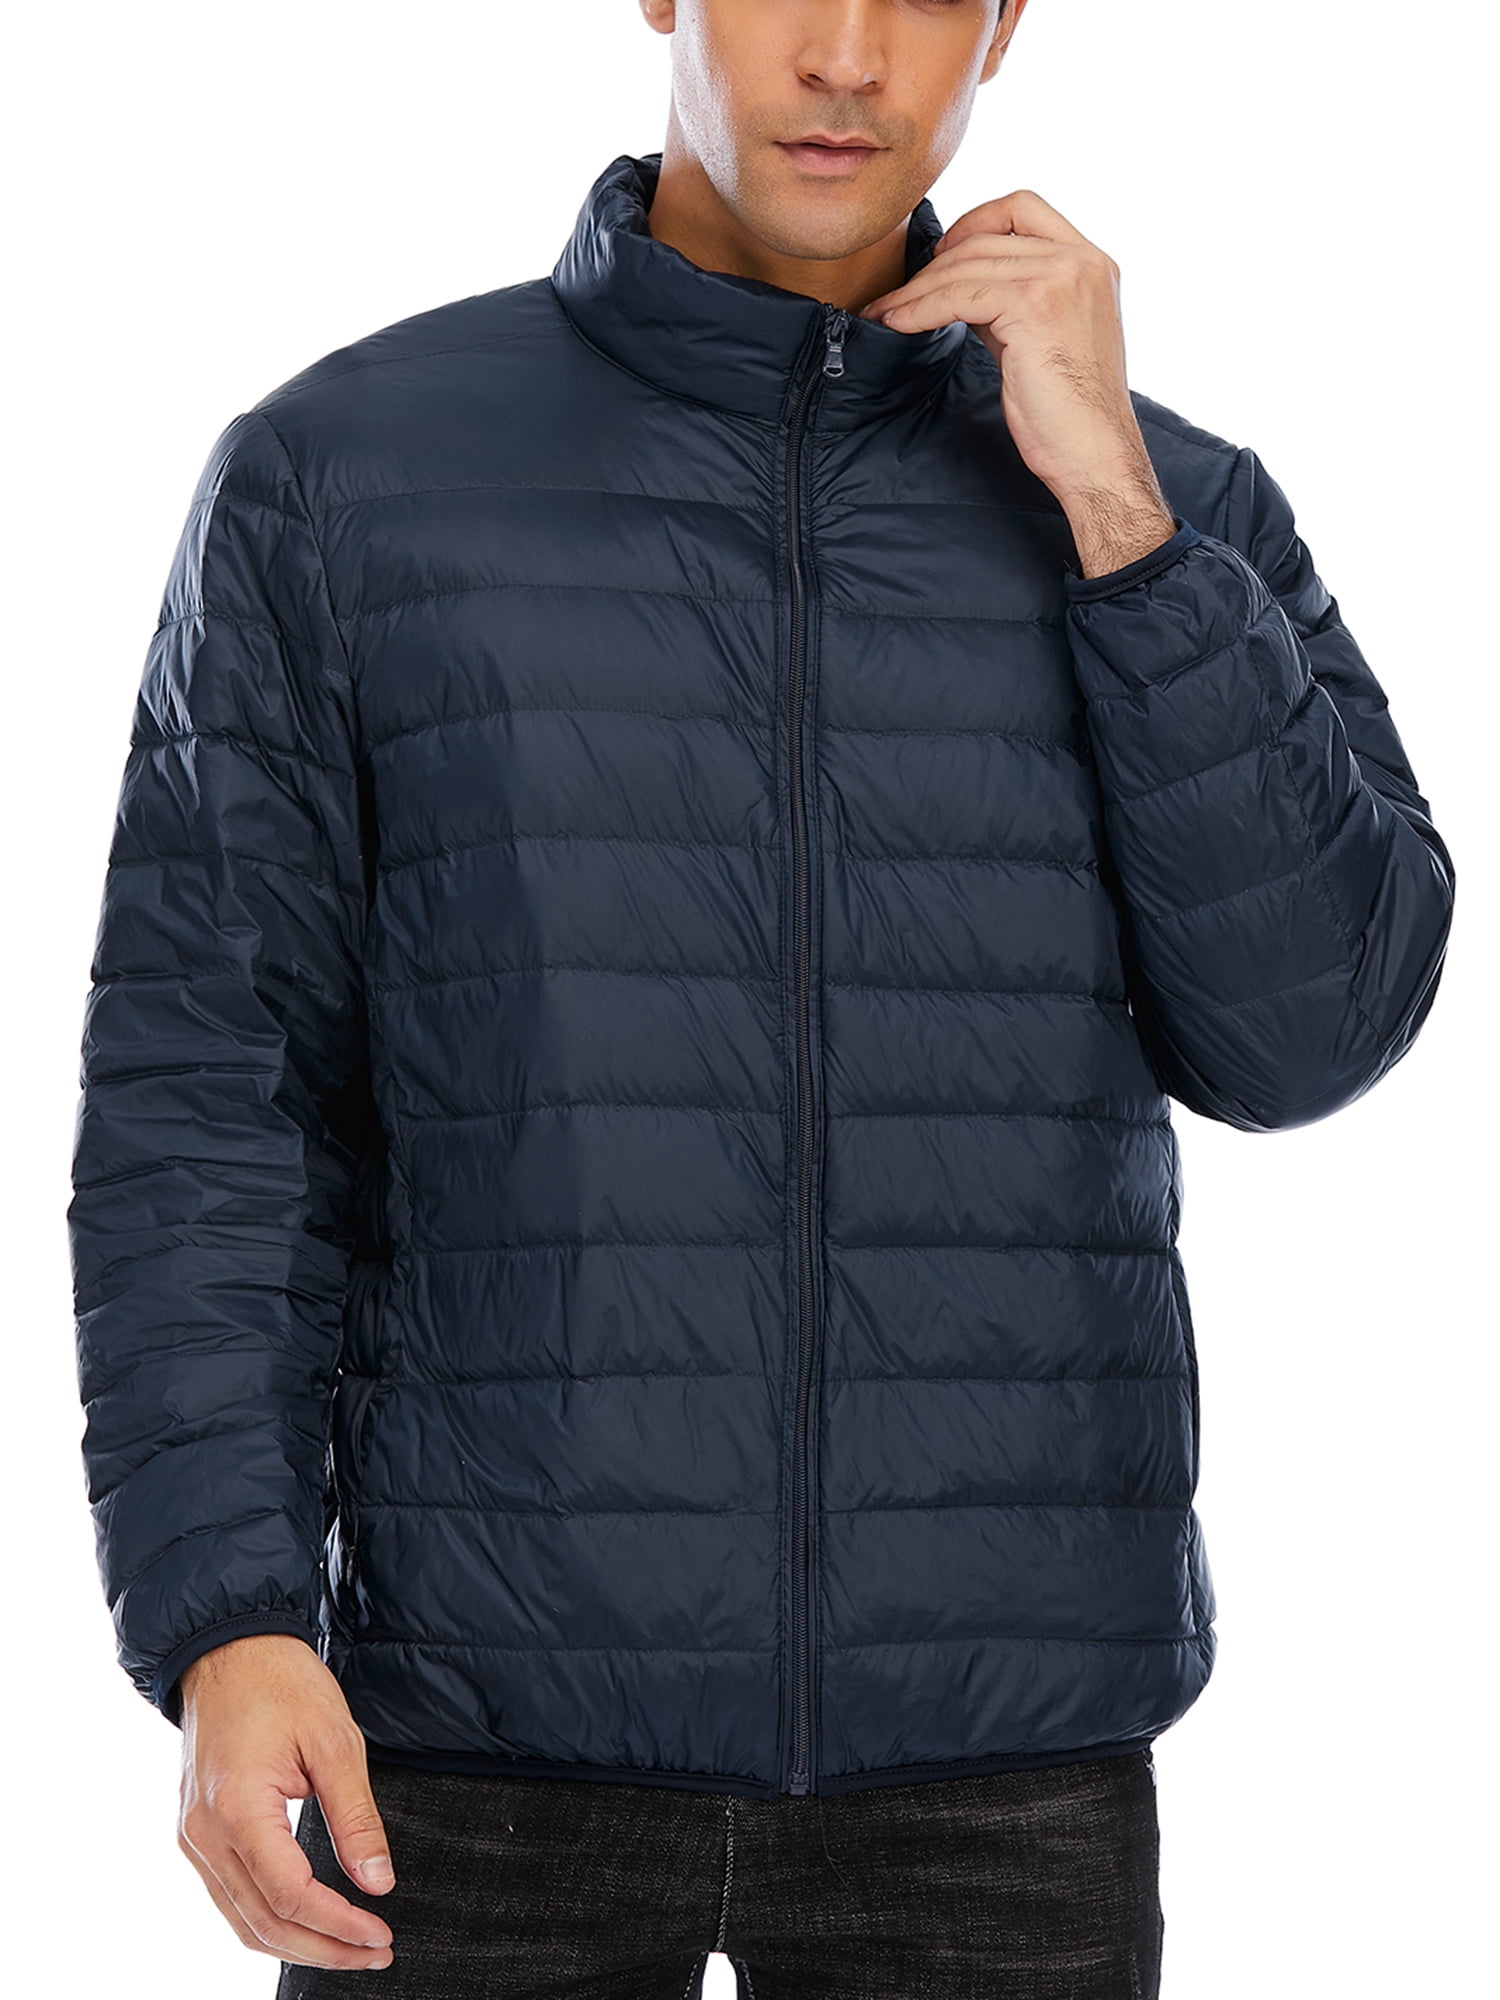 Lightweight down jacket men’s – what are the good-looking styles?插图4